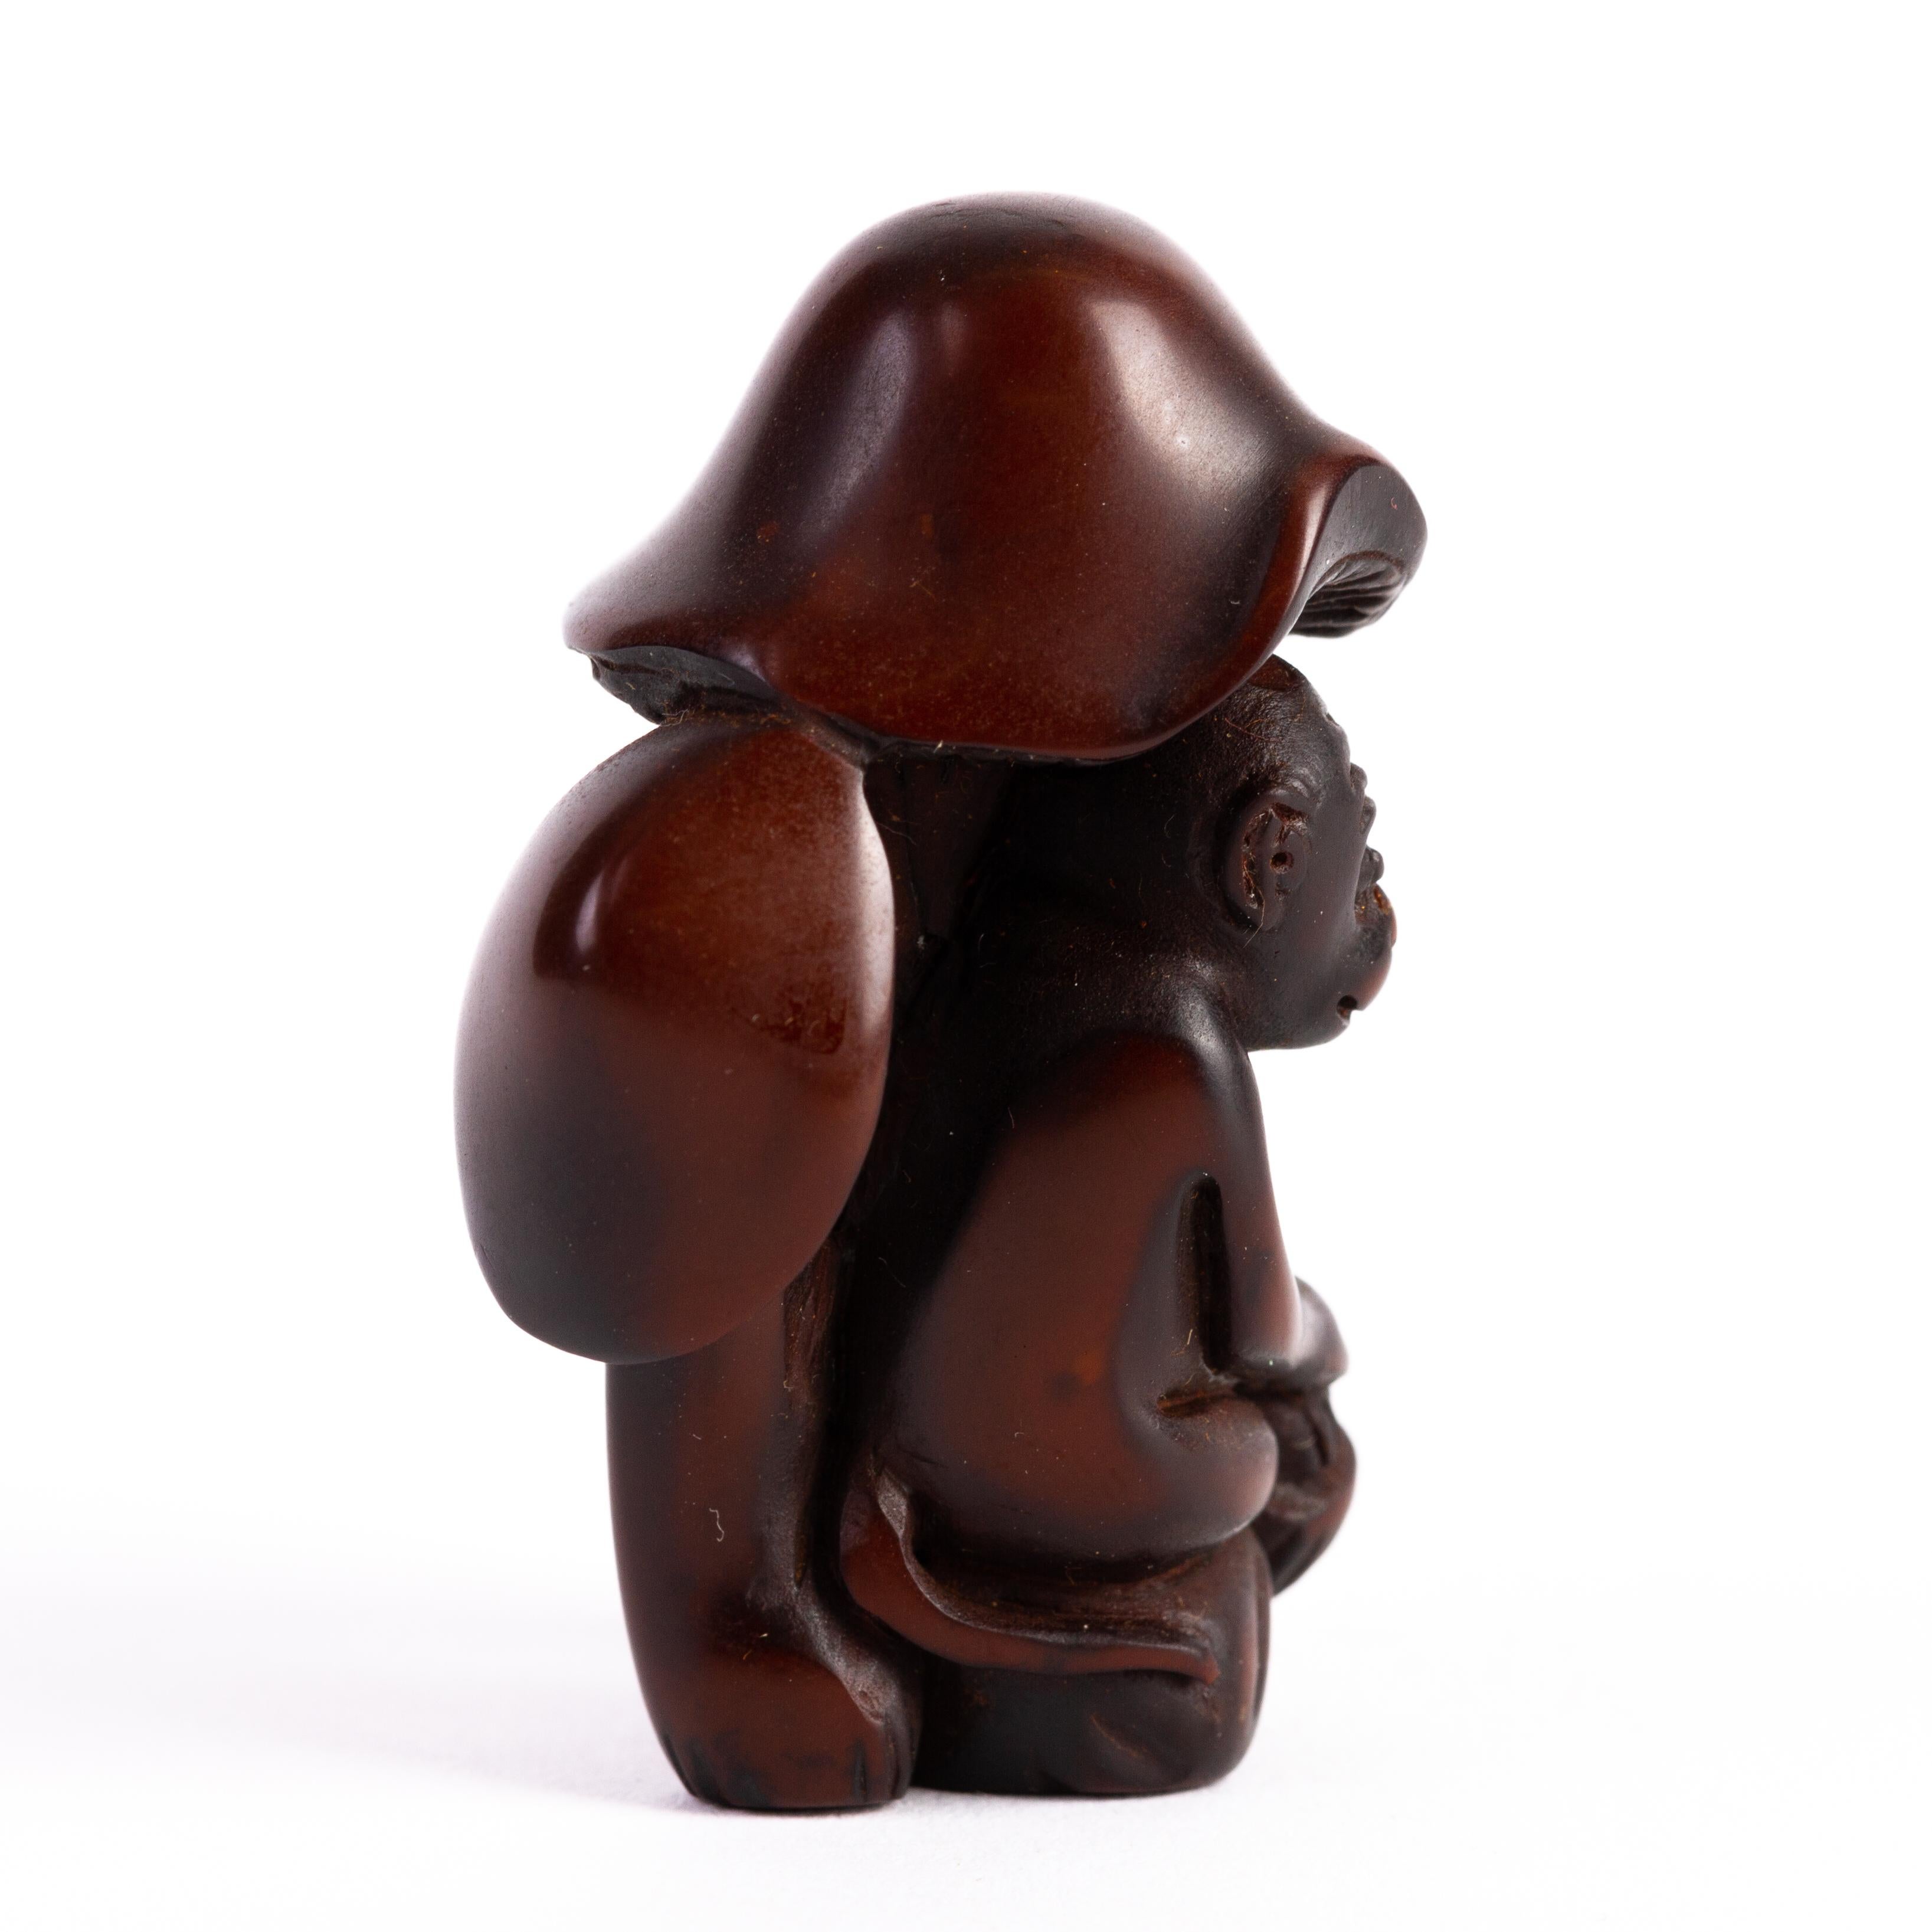 From a private collection.
Free international shipping.
Japanese Boxwood Netsuke of Monkey & Shrooms 